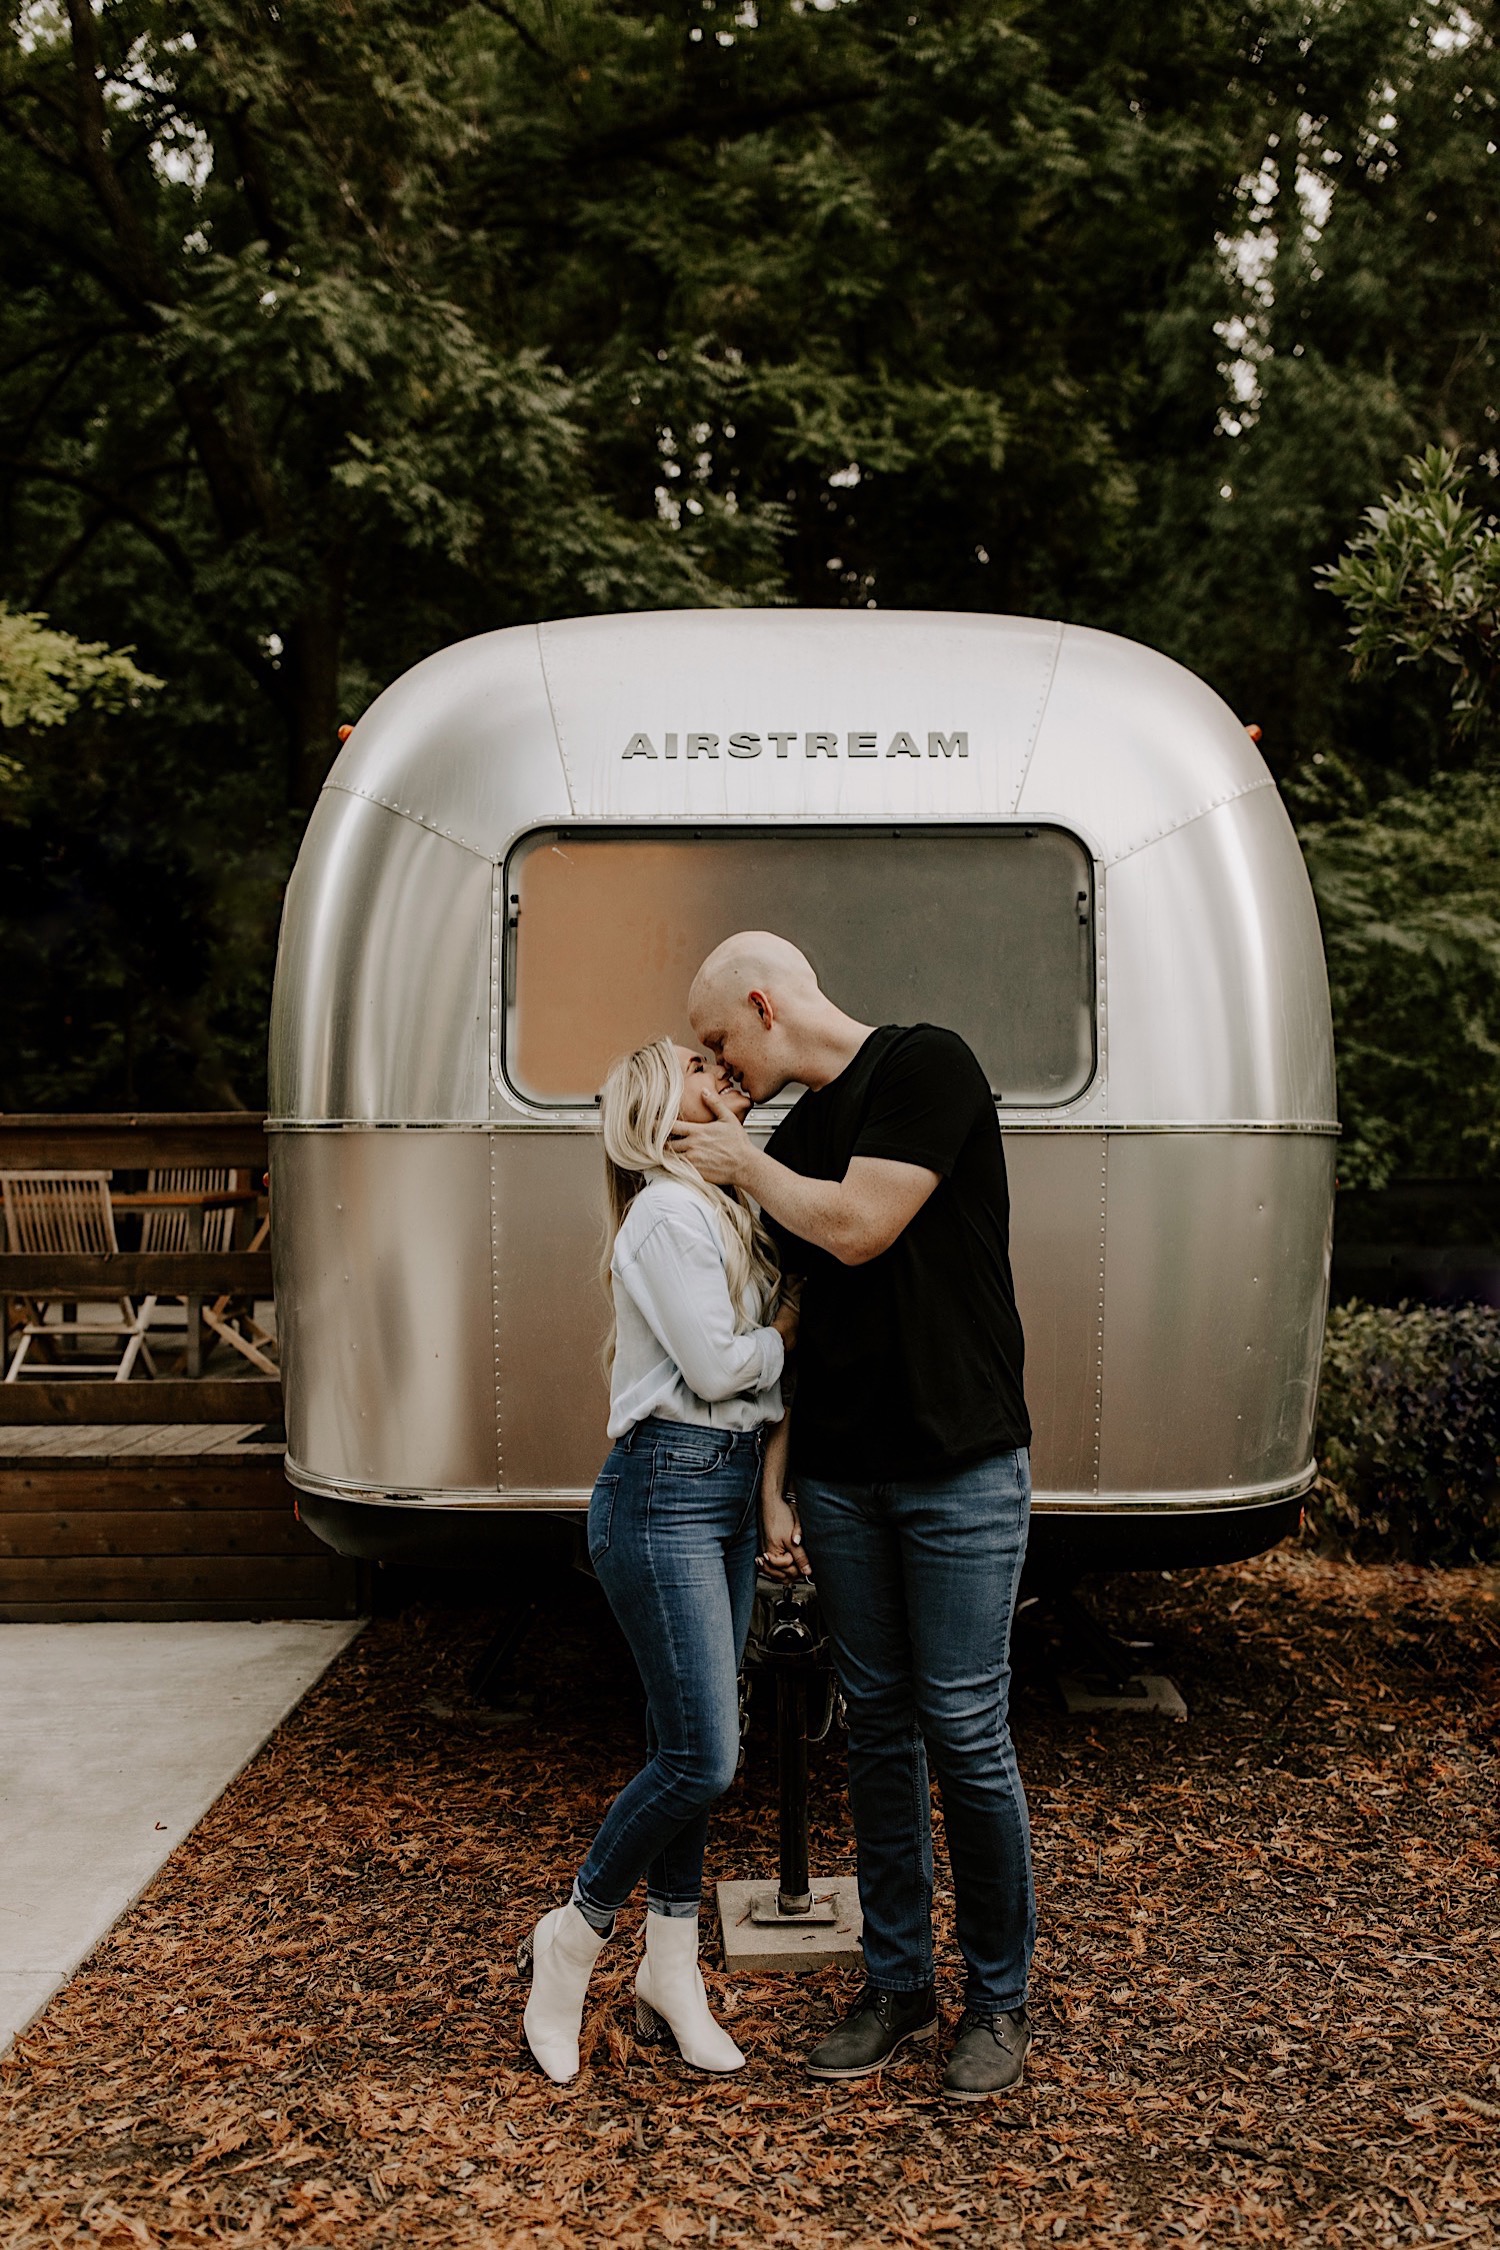 airstream camp engagement session inspiration